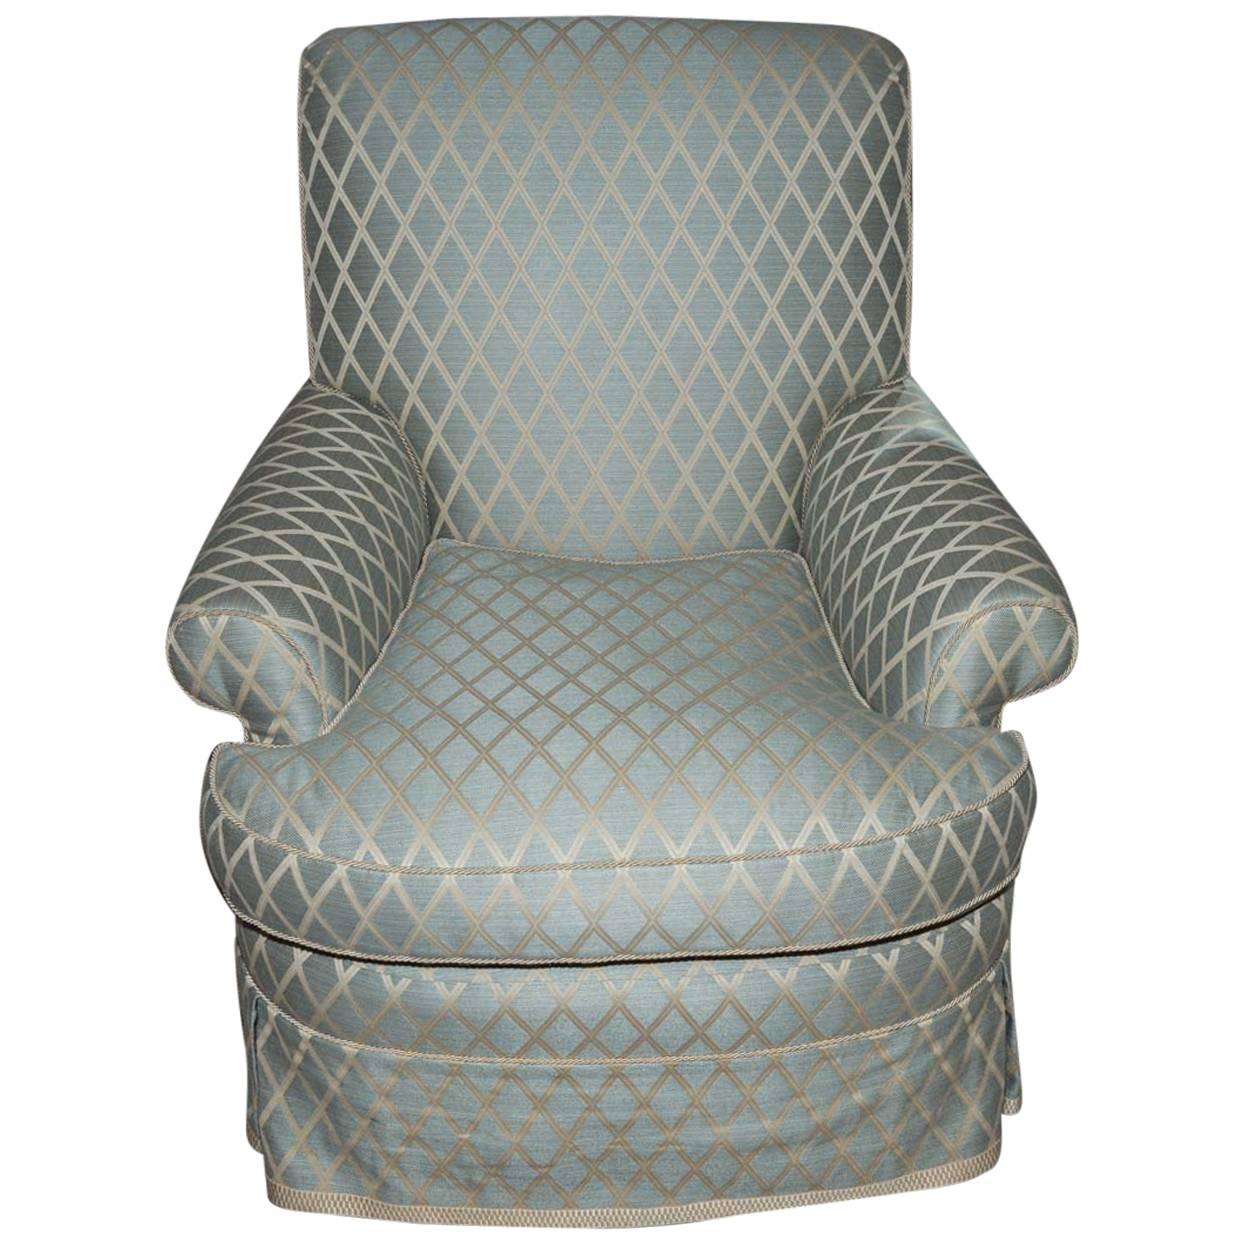 Attractive Upholstered Swivel Armchair For Sale